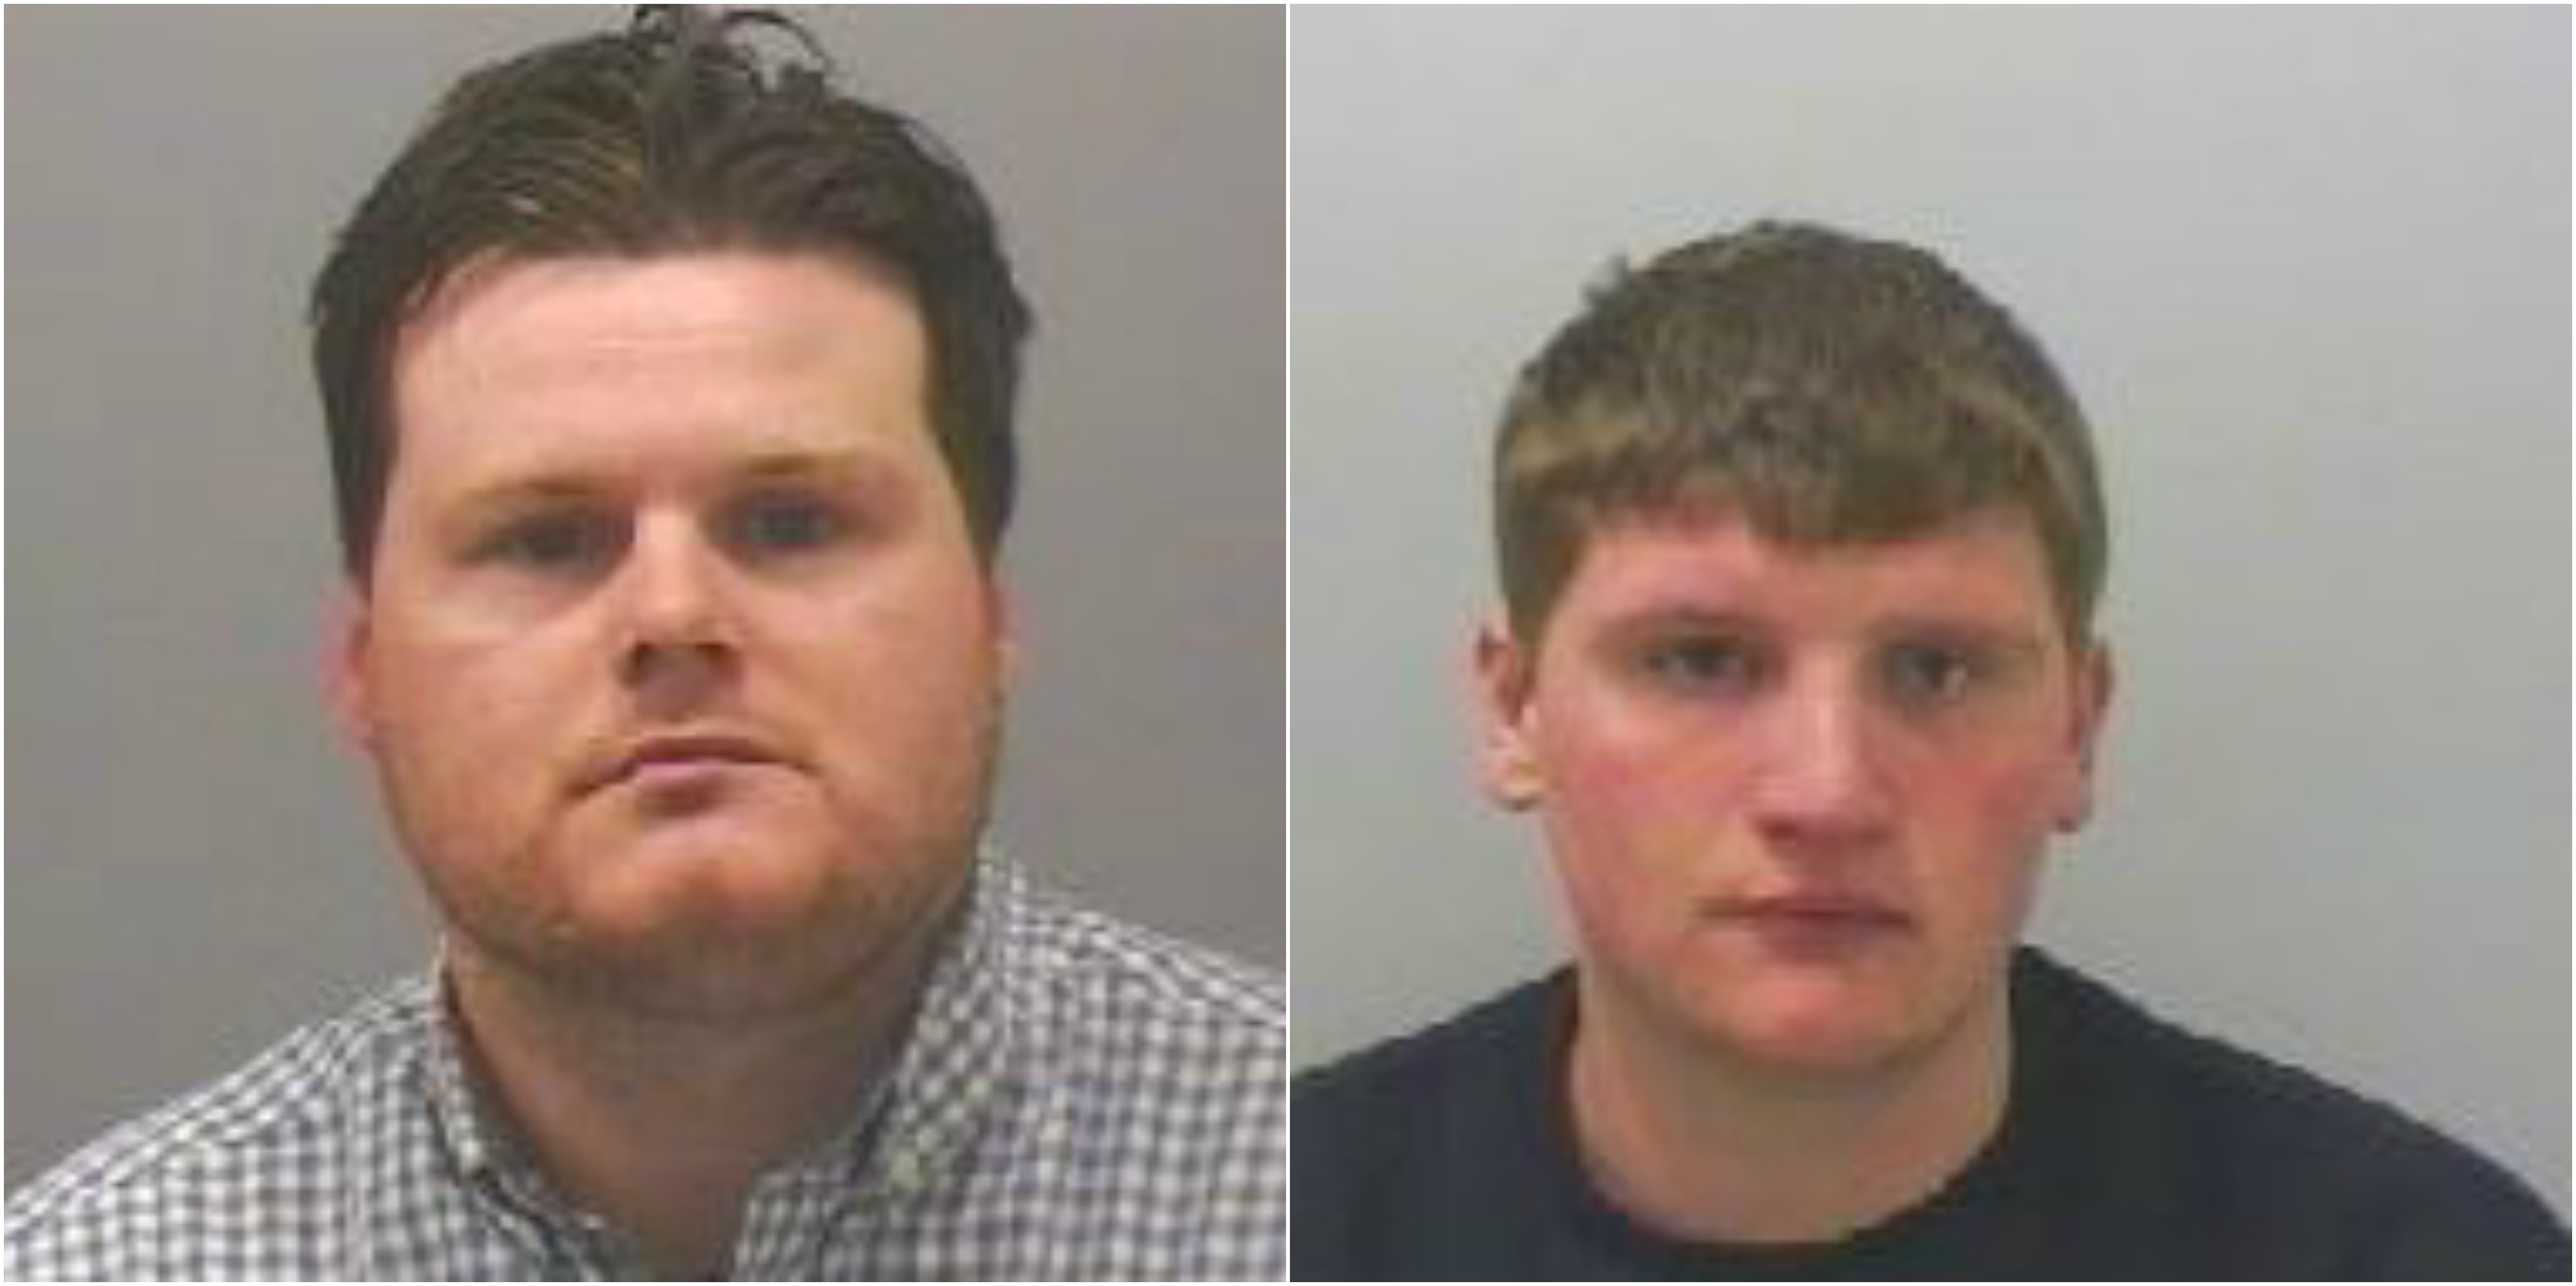 More information about "Two convicted of fraud offences"